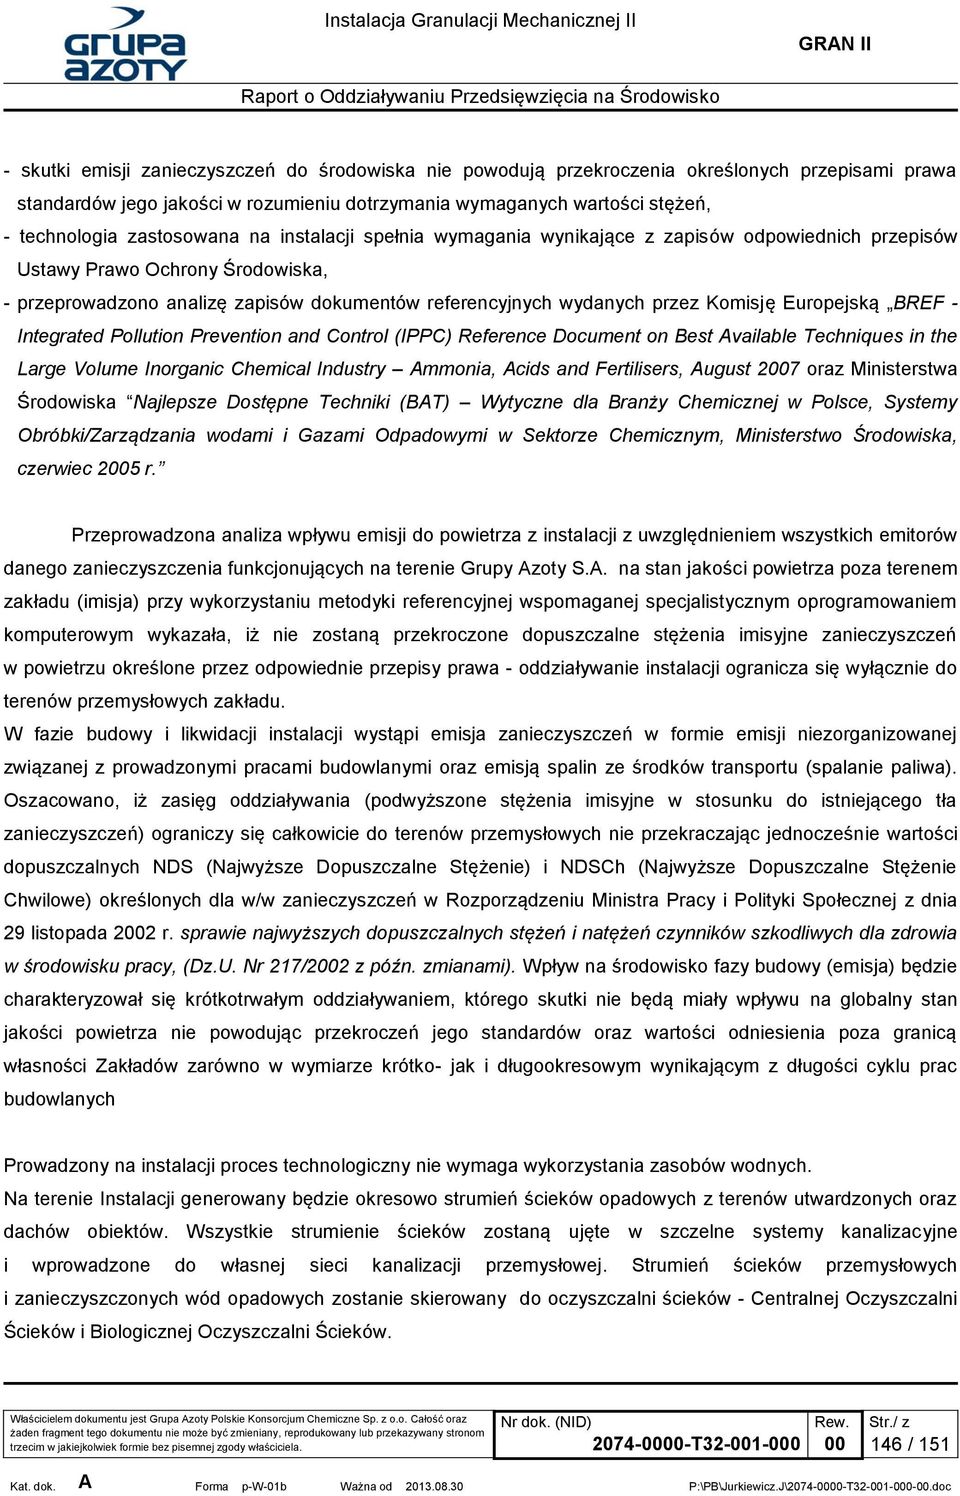 Komisję Europejską BREF - Integrated Pollution Prevention and Control (IPPC) Reference Document on Best Available Techniques in the Large Volume Inorganic Chemical Industry Ammonia, Acids and